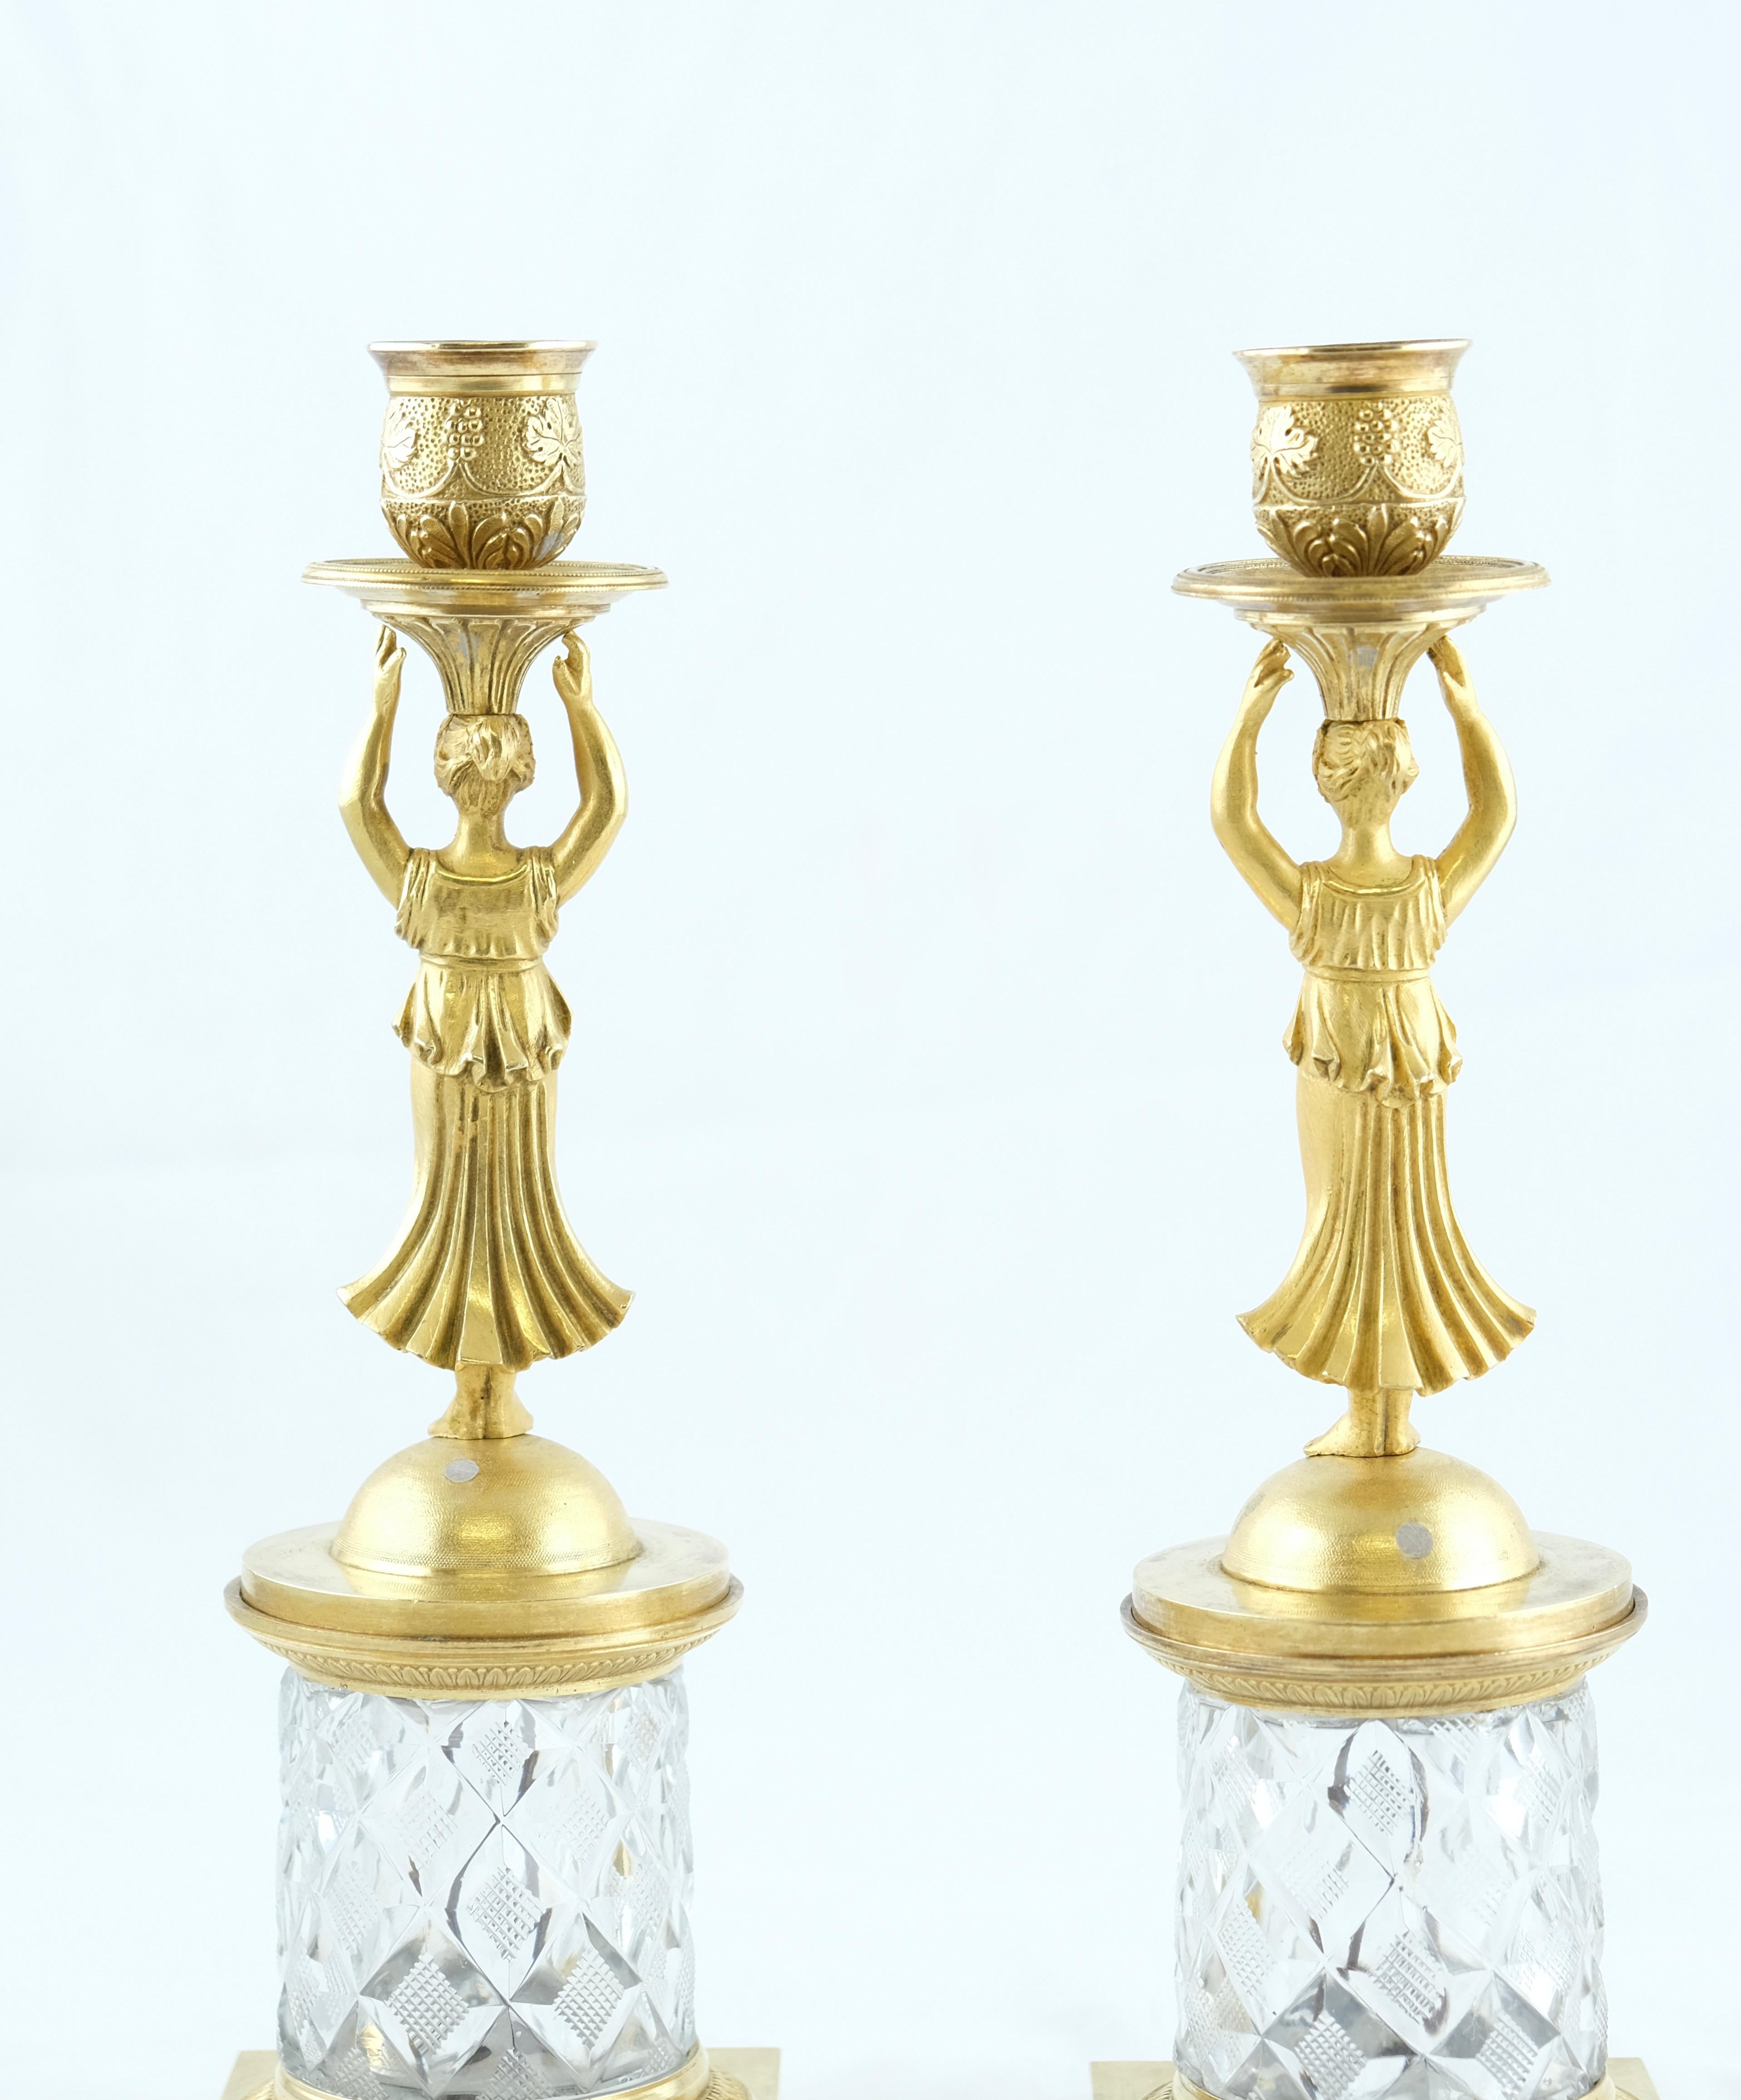 Pair of Empire Gilt Bronze and Cut Crystal Candlesticks, Ca 1810 For Sale 3